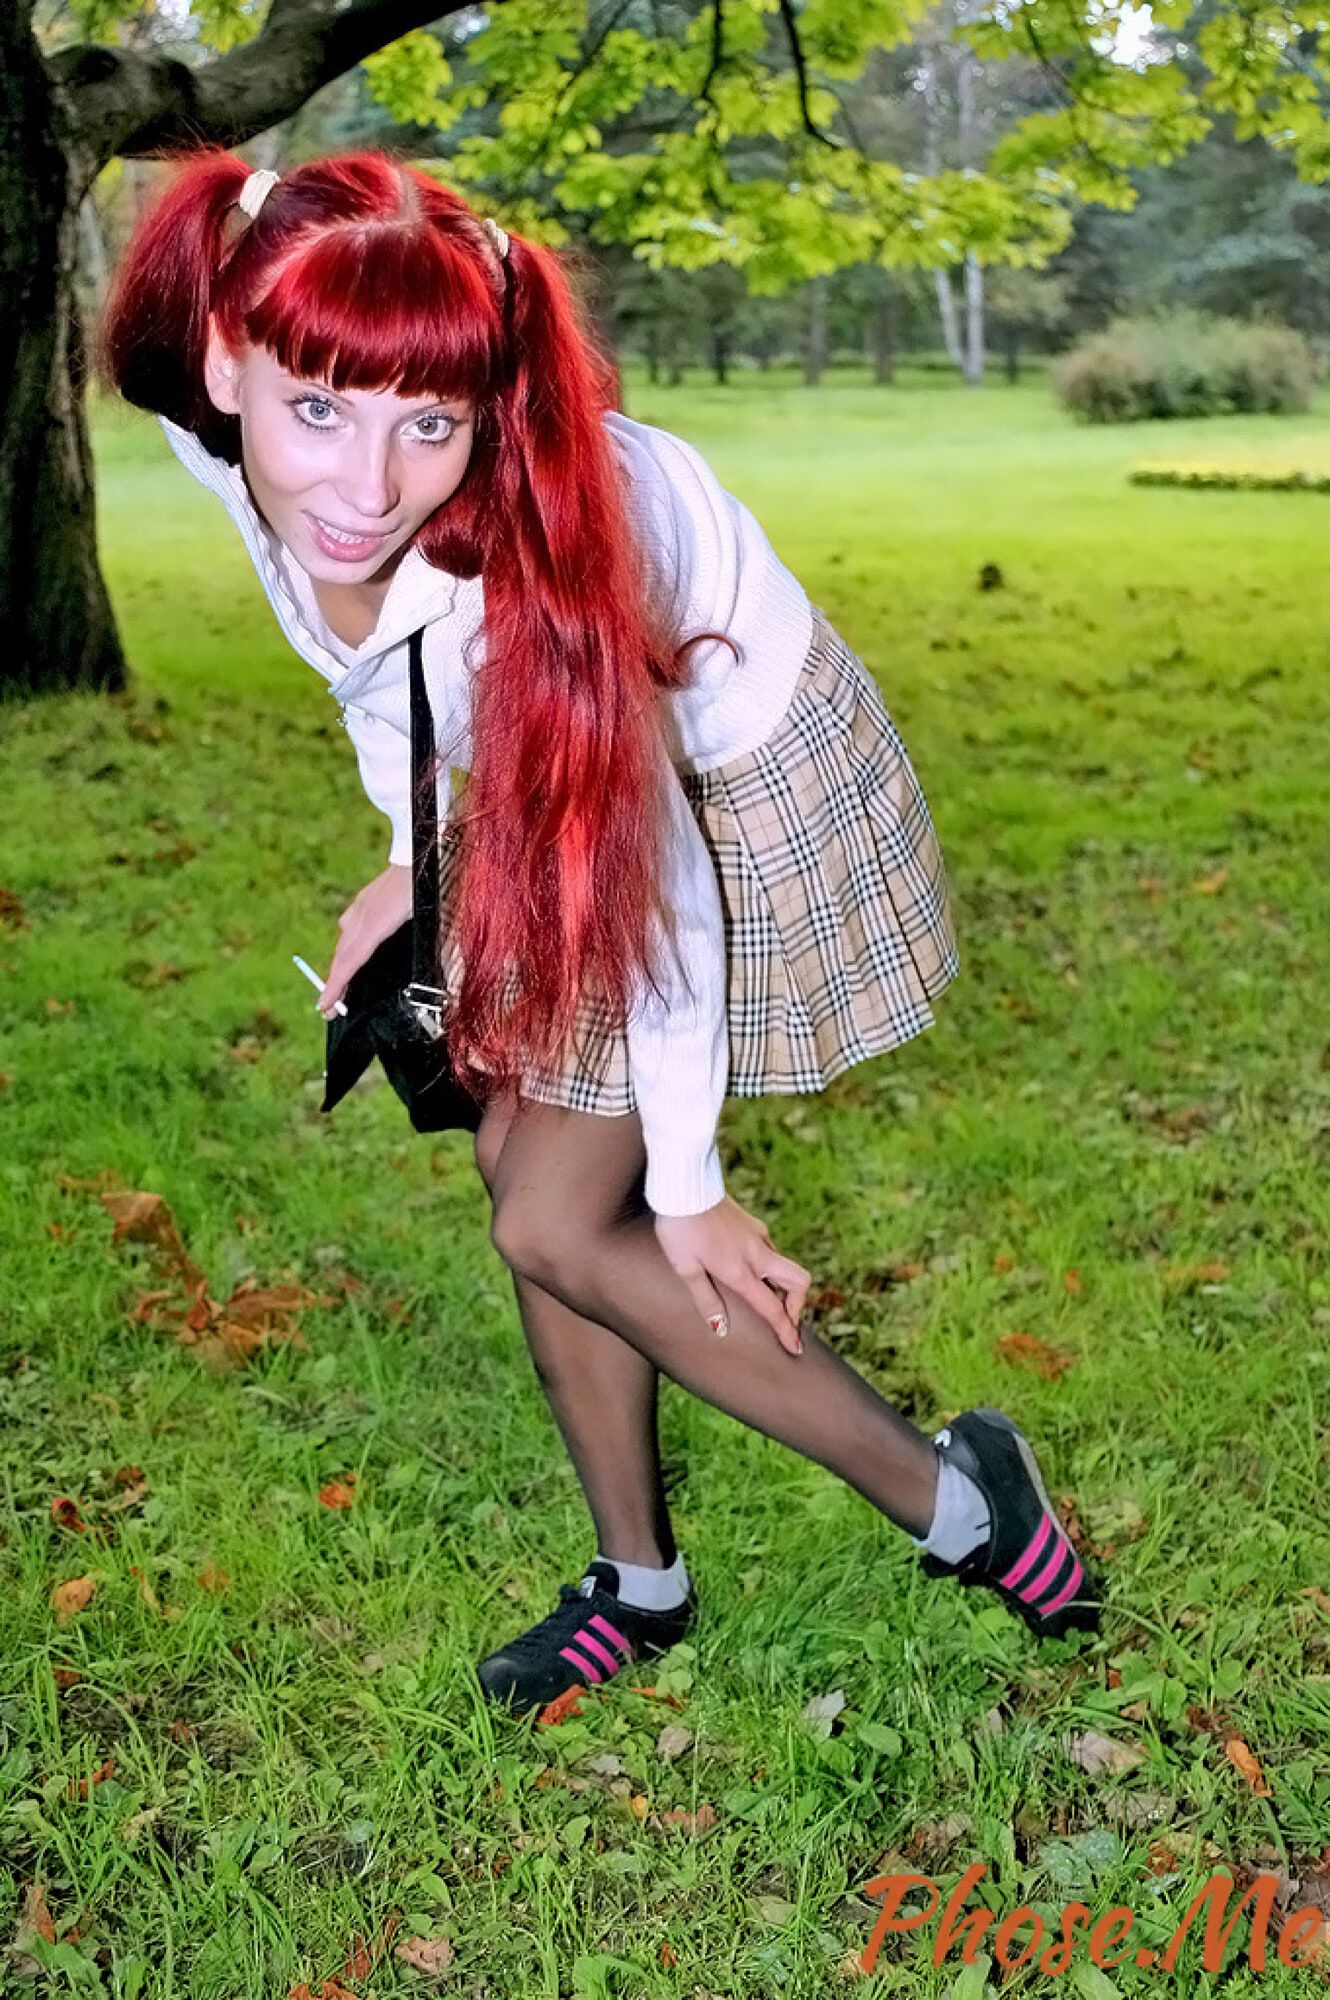 Redhead Outdoors In Plaid Skirt and Black Pantyhose #7